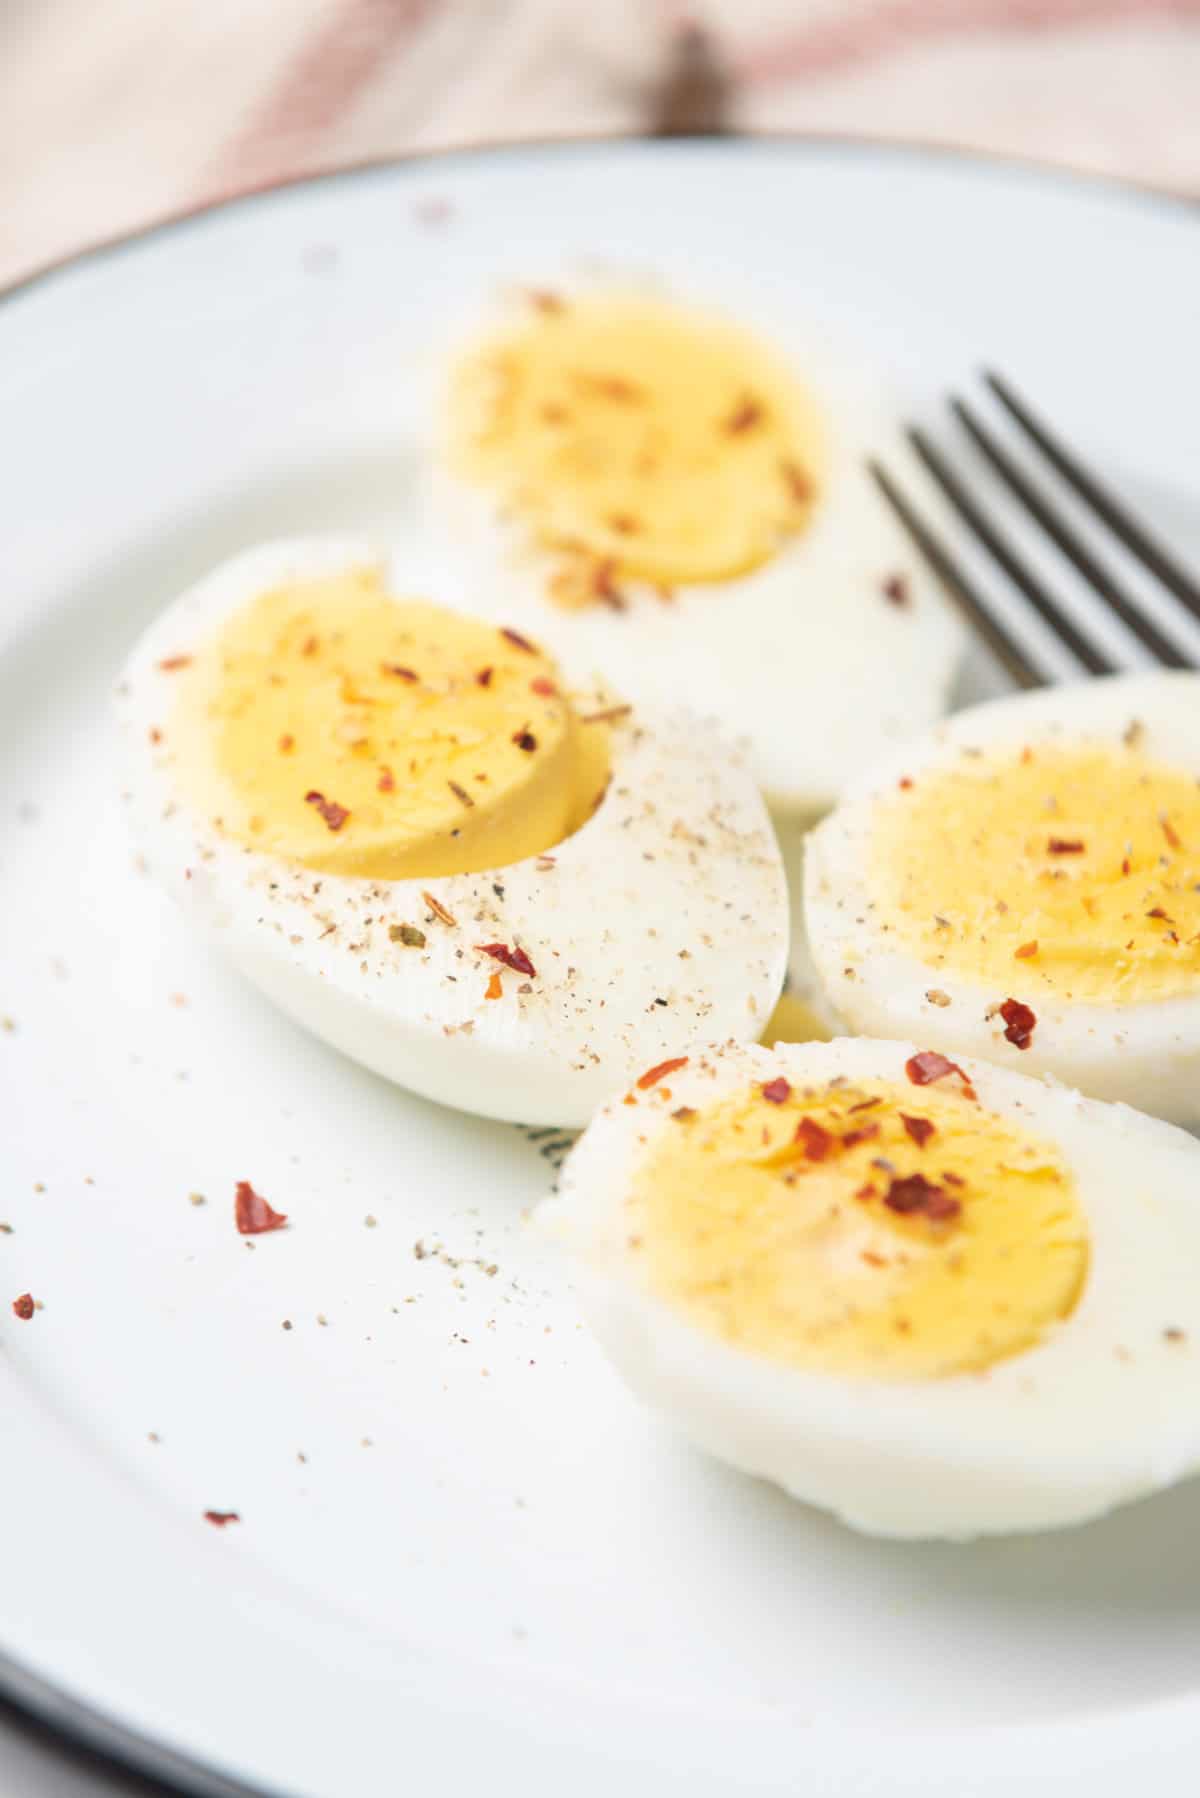 An image of two hard boiled eggs sliced in half, topped with seasonings, and being served on a plate with a fork behind them.